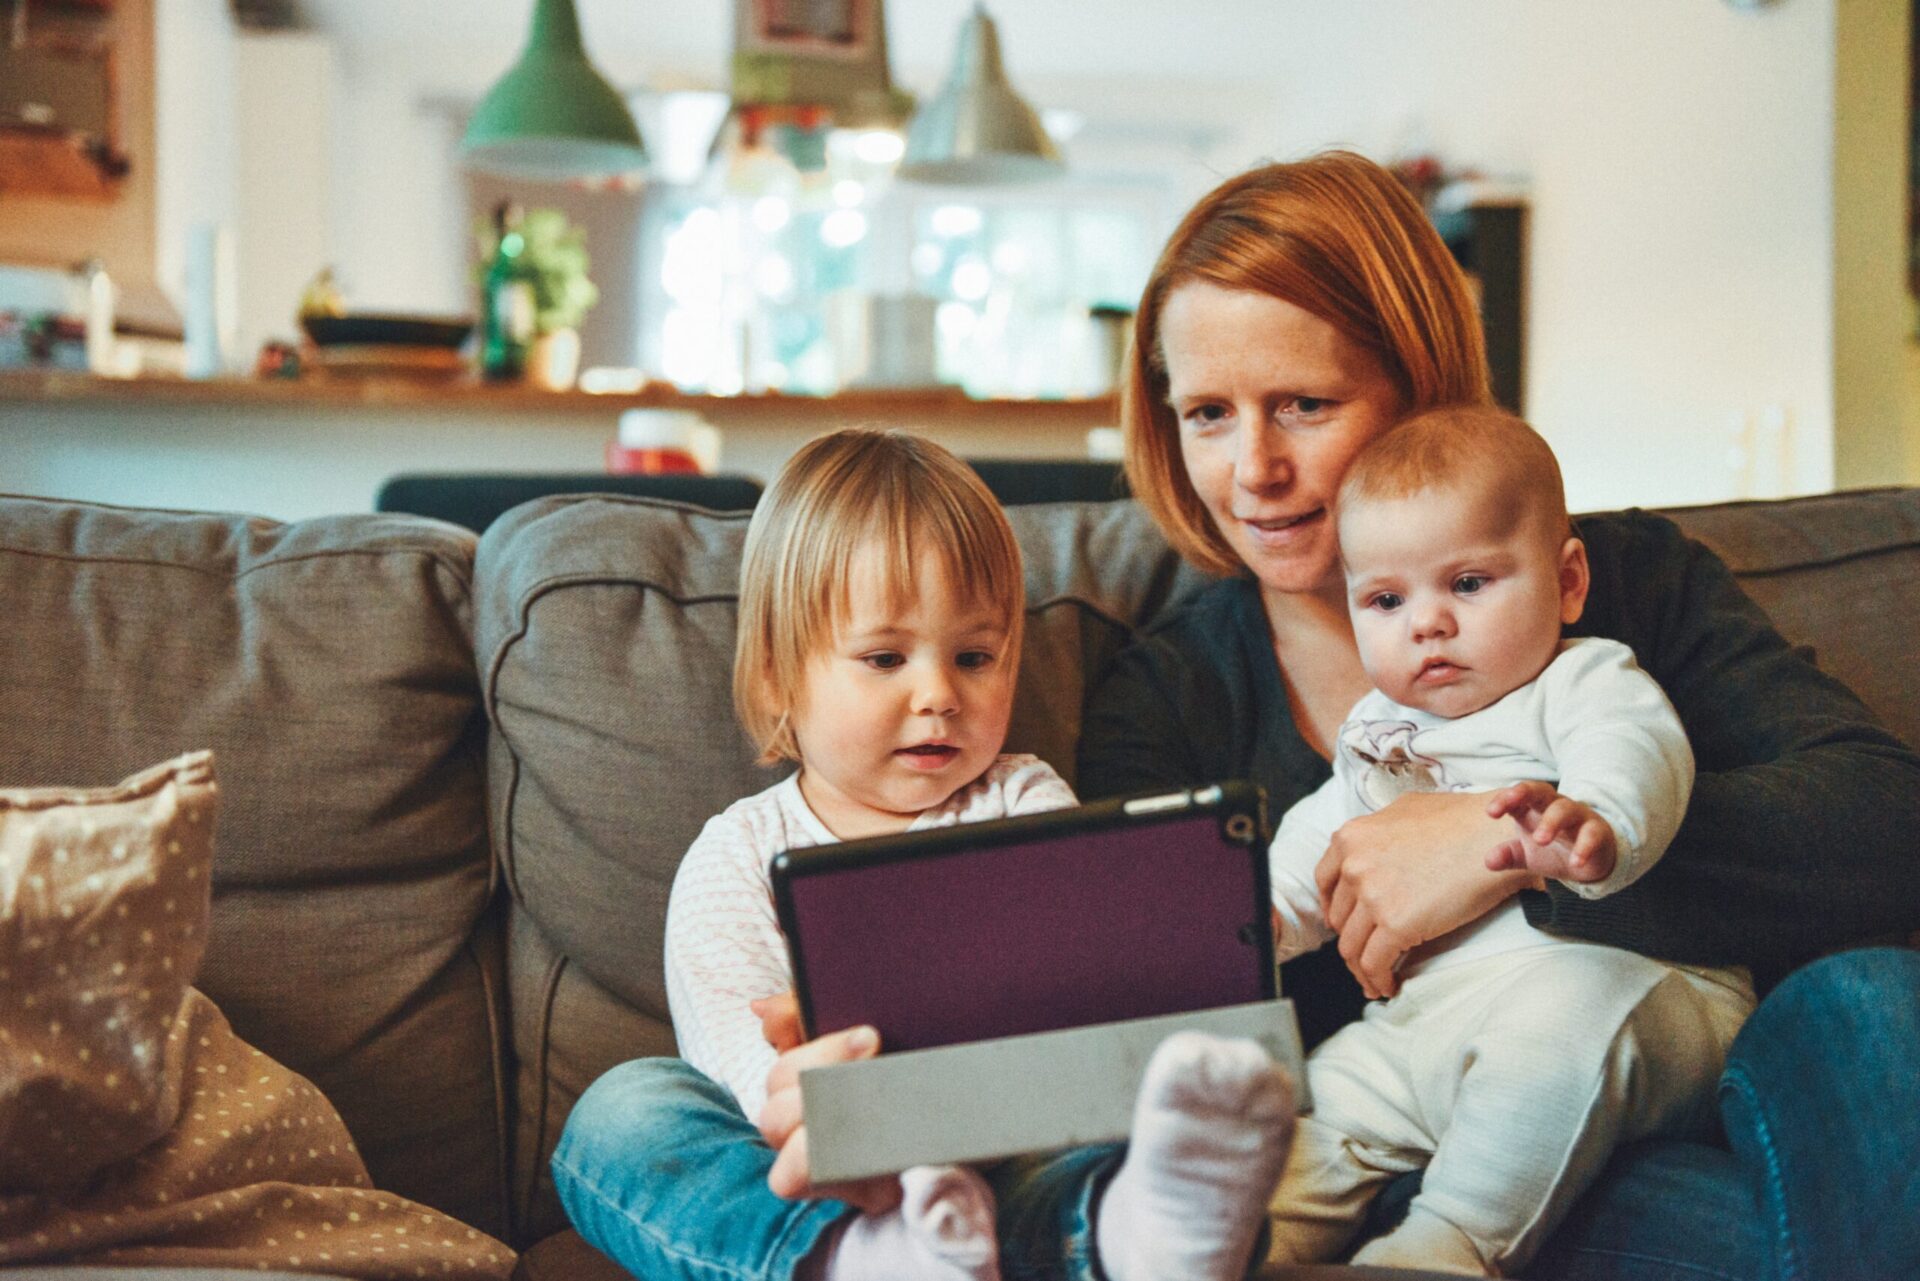 A mother sits on the couch with her toddler, baby, and iPad.